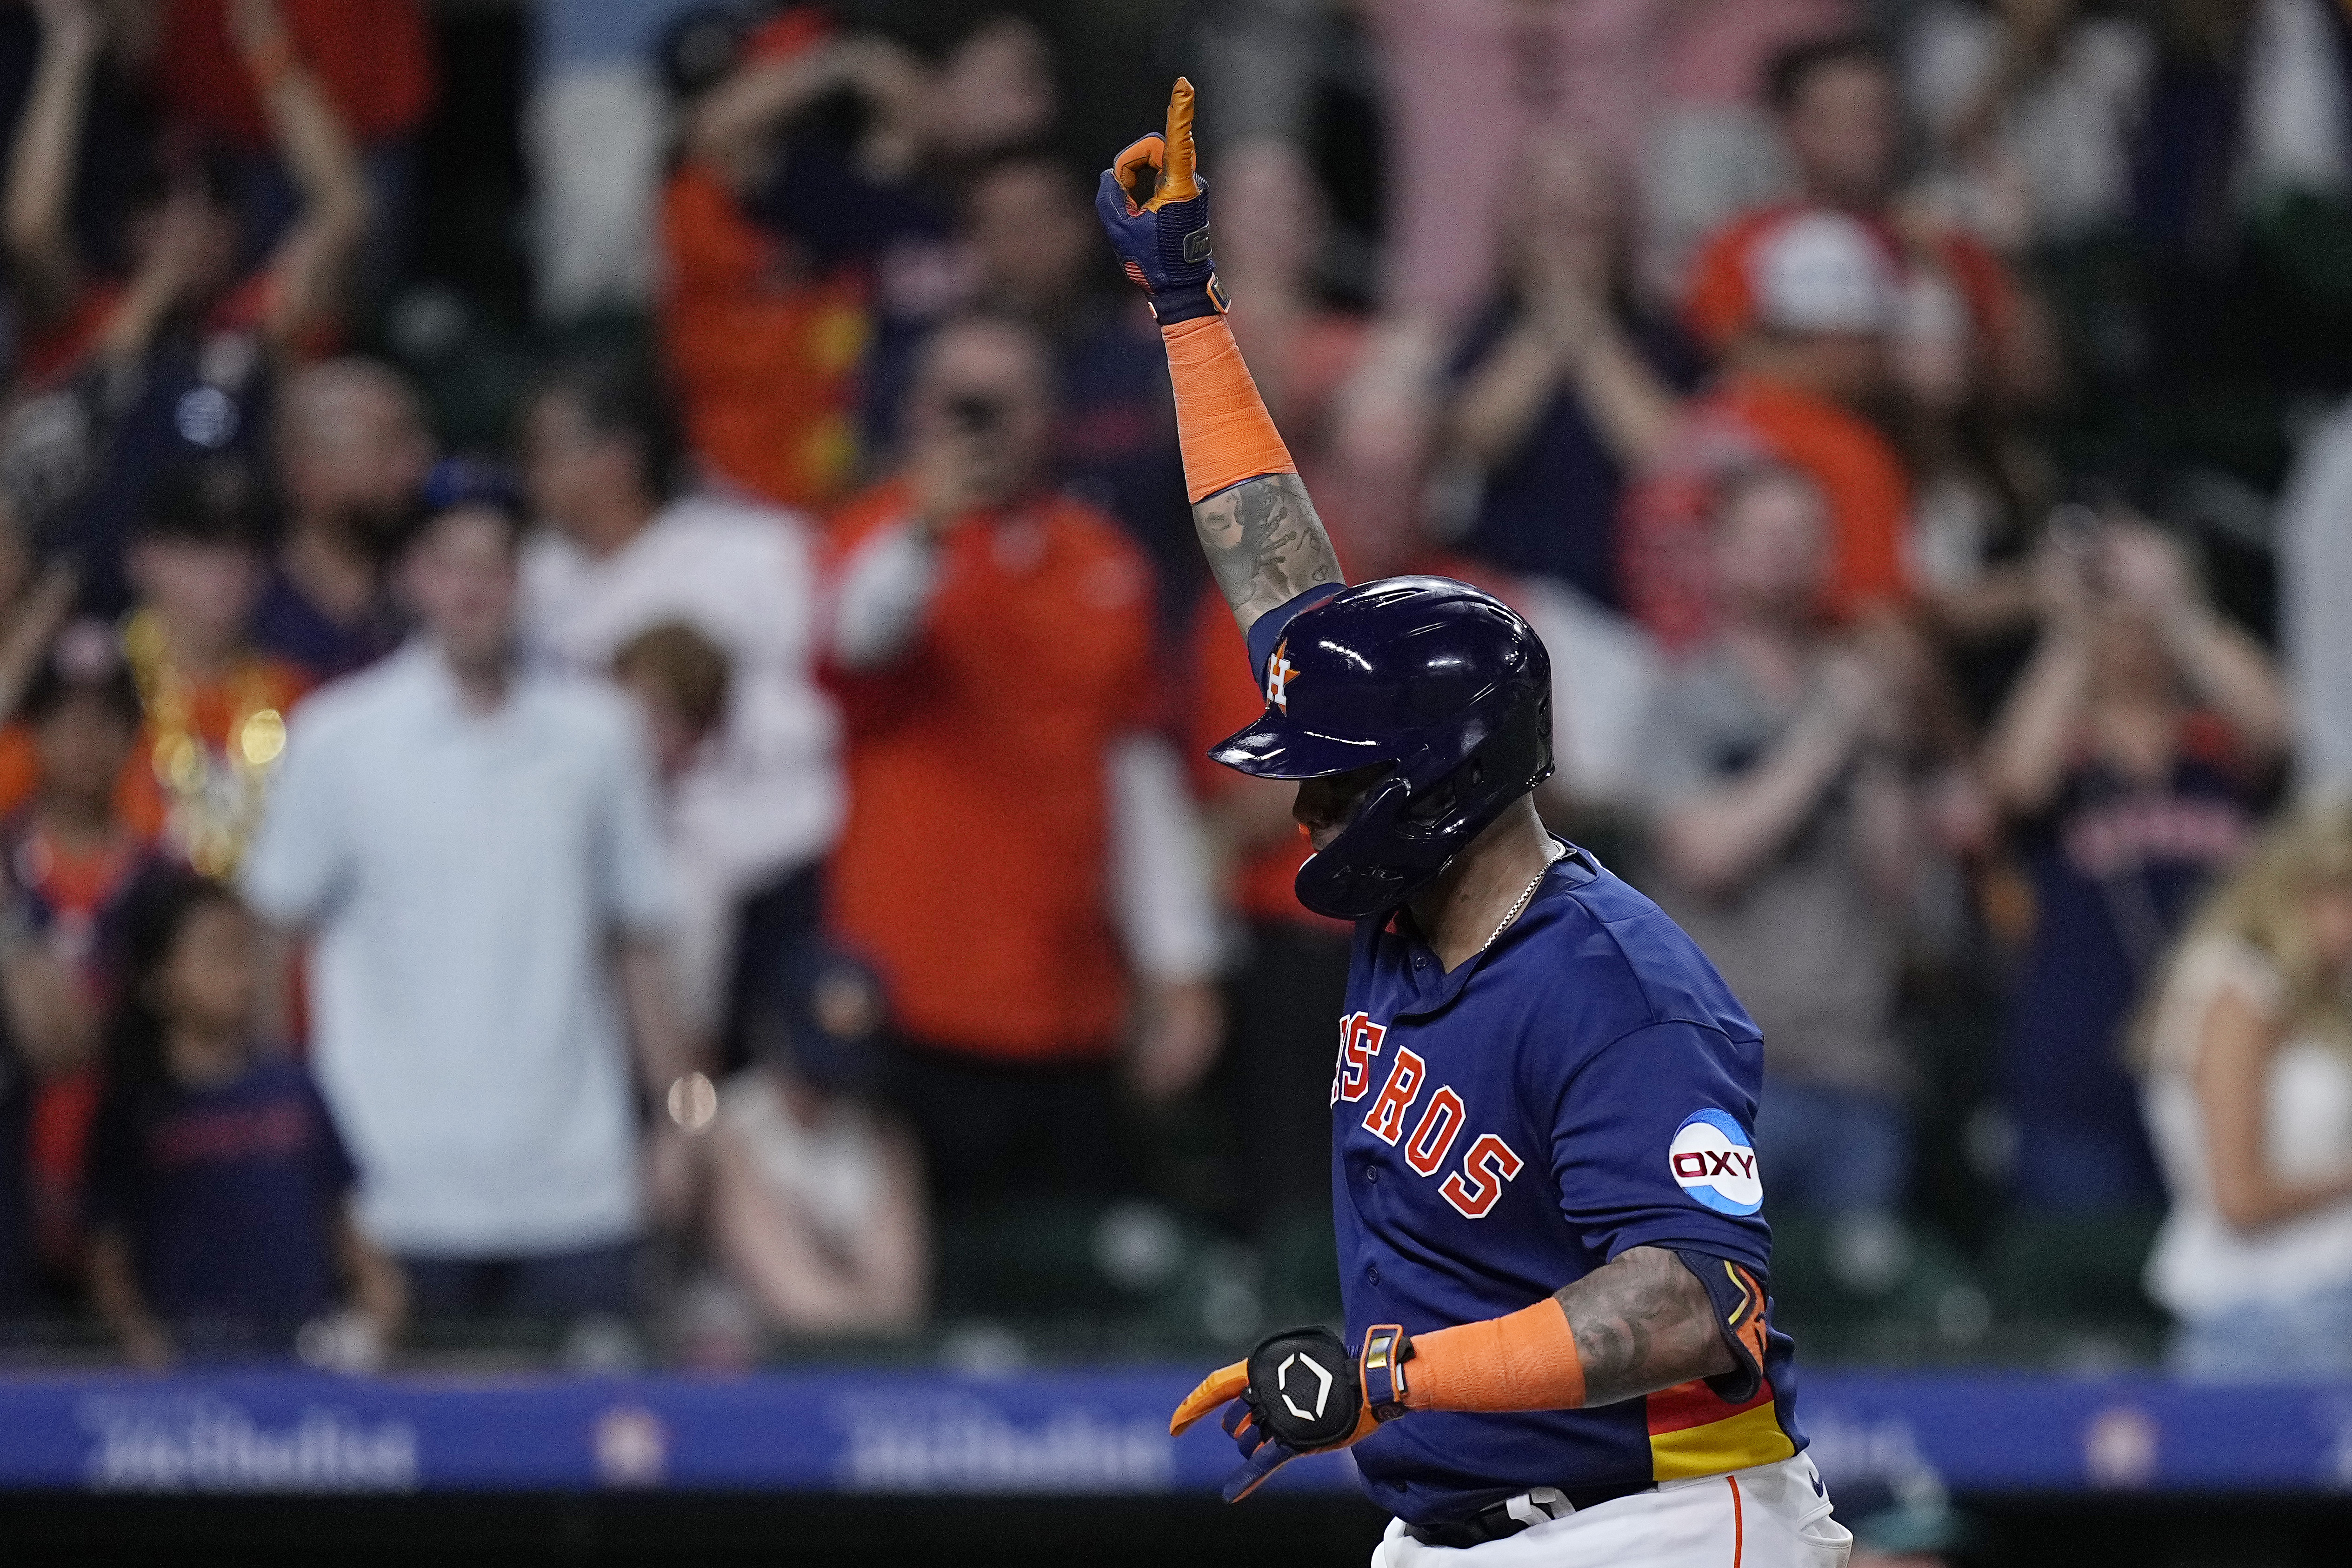 Down 2-0, Houston Astros in New Territory for Their ALCS History